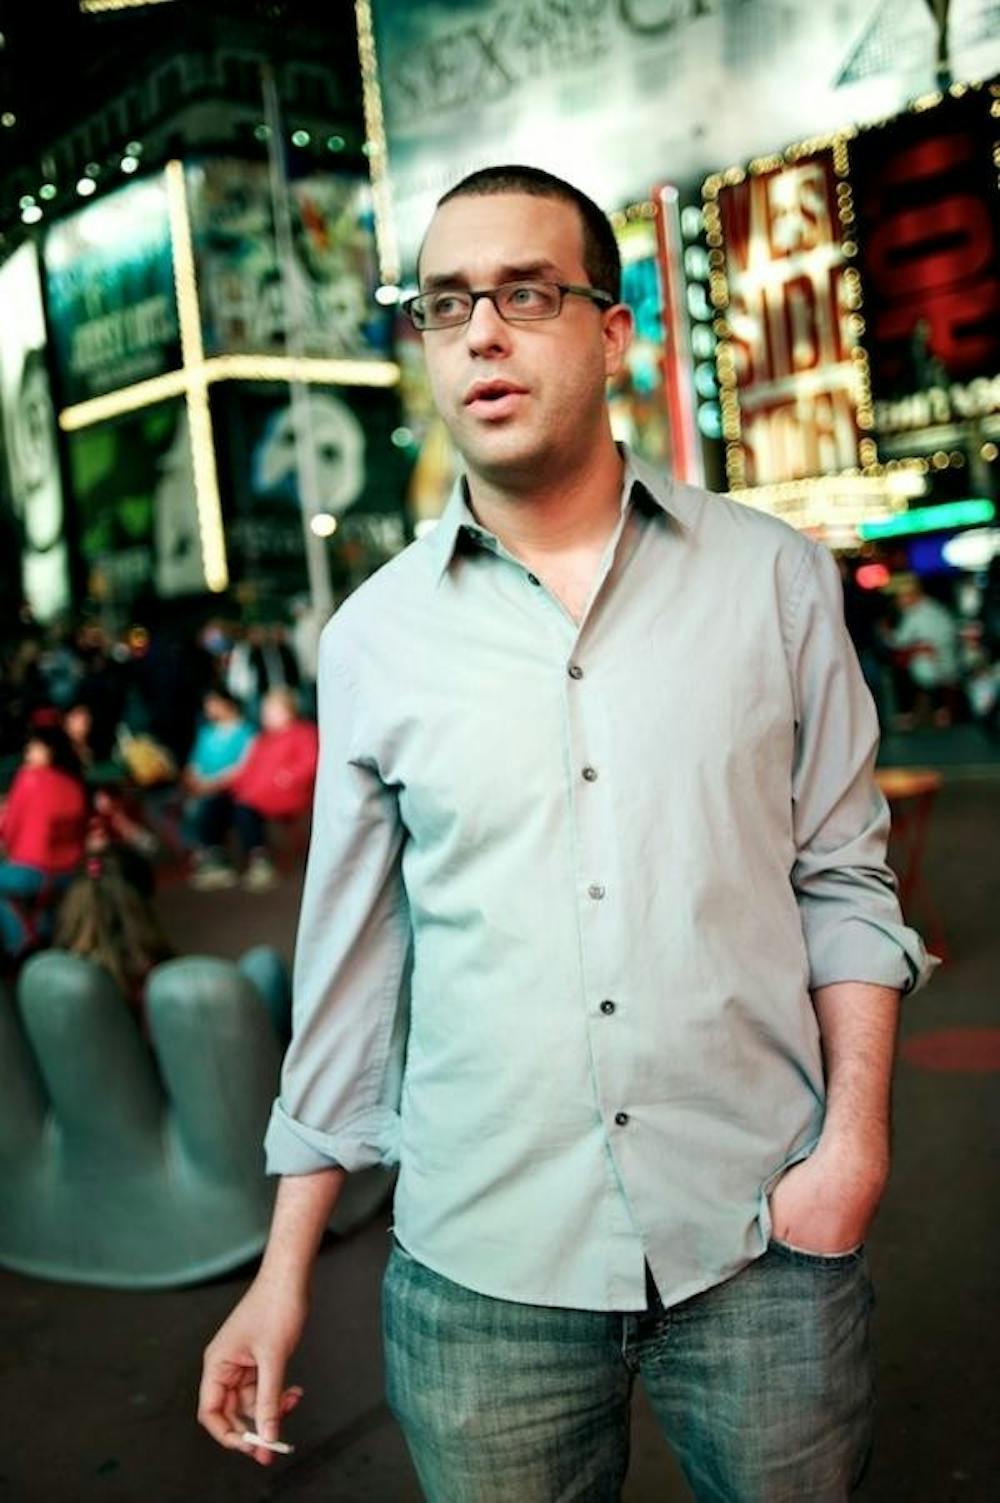 	<p>In addition to writing and directing, Joe DeRosa has made appearances on FX&#8217;s &#8220;Louie&#8221; and <span class="caps">HBO</span>&#8217;s &#8220;Bored to Death.&#8221;</p>